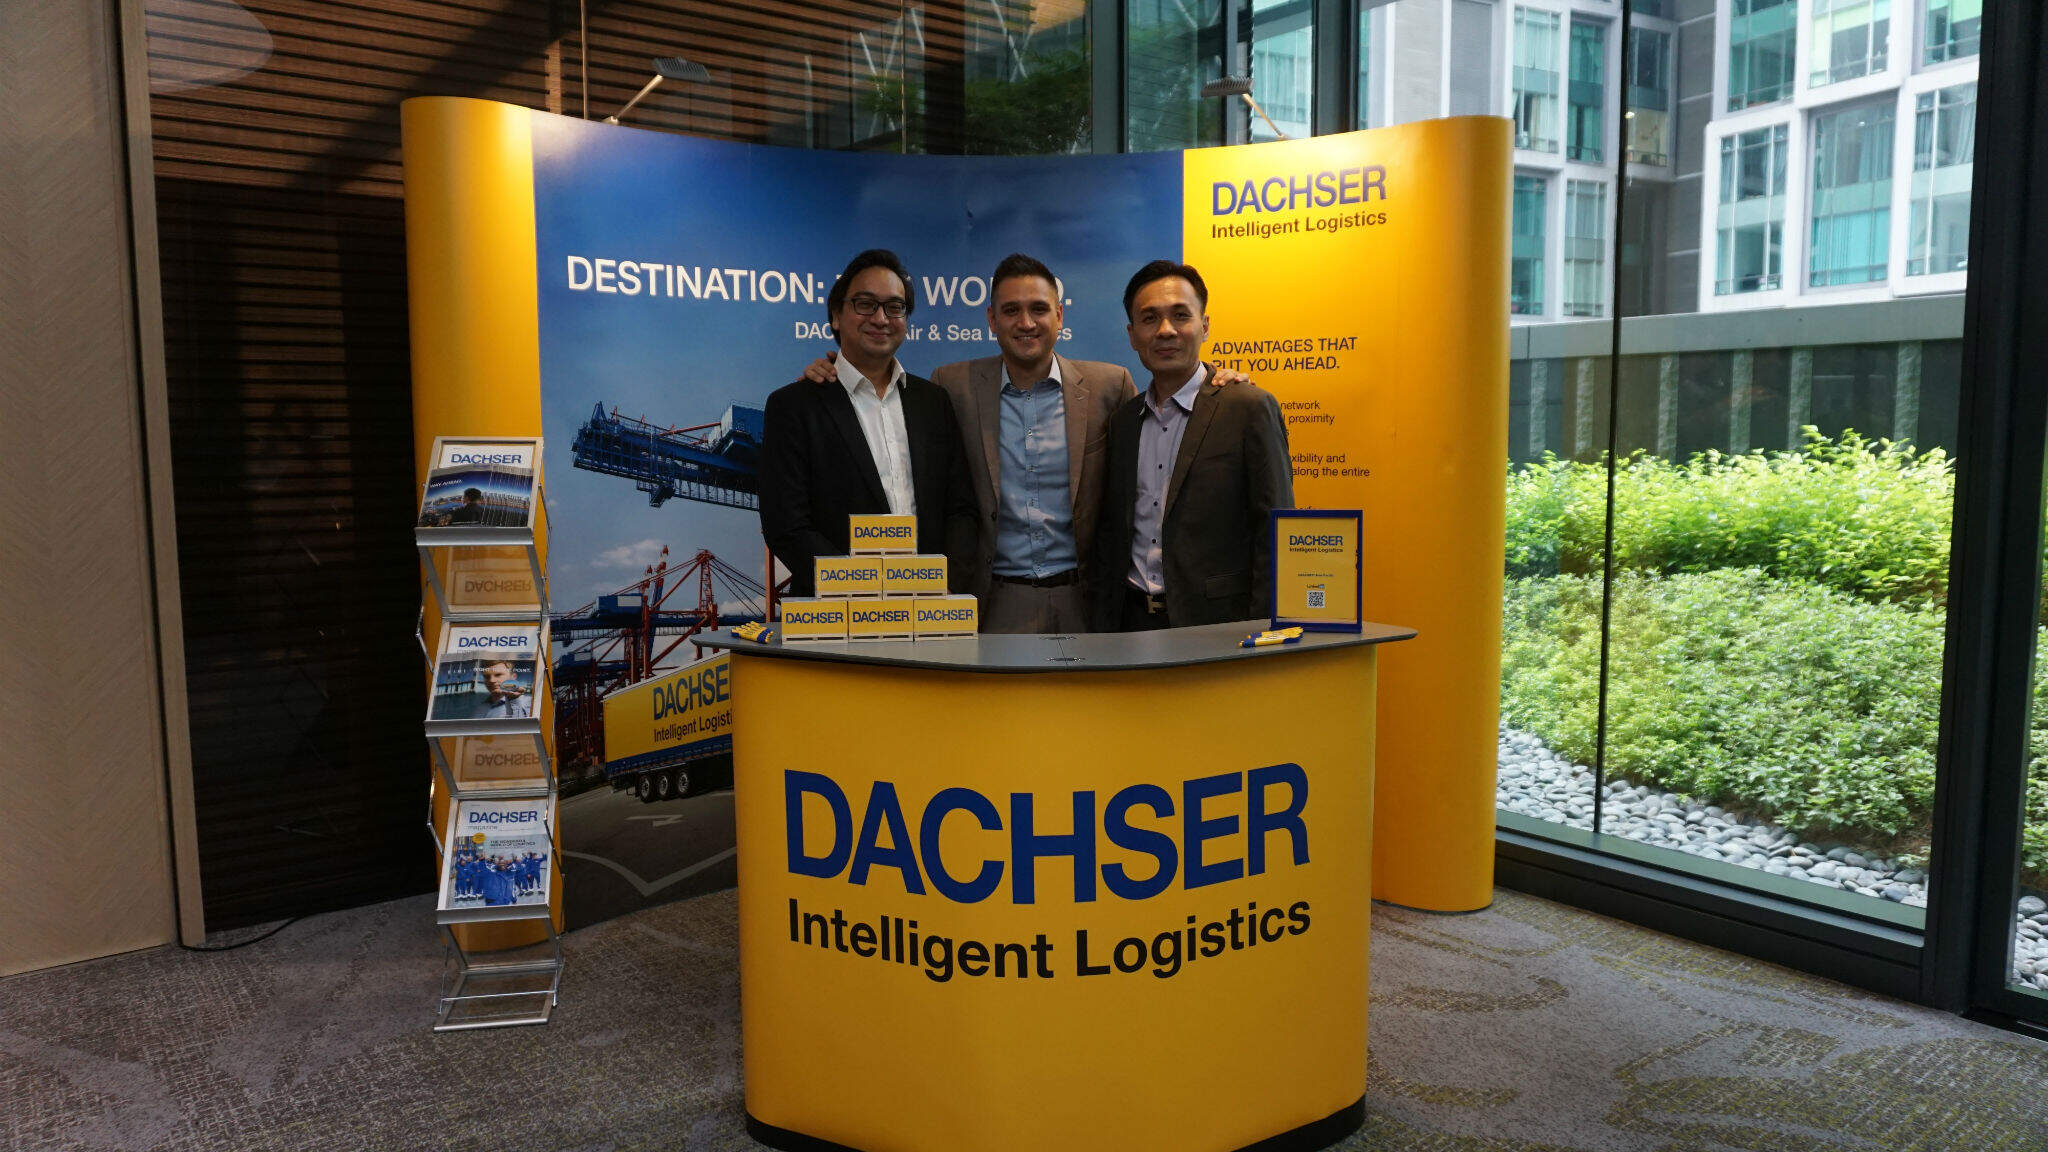 DACHSER, a reliable partner for logistics solutions.